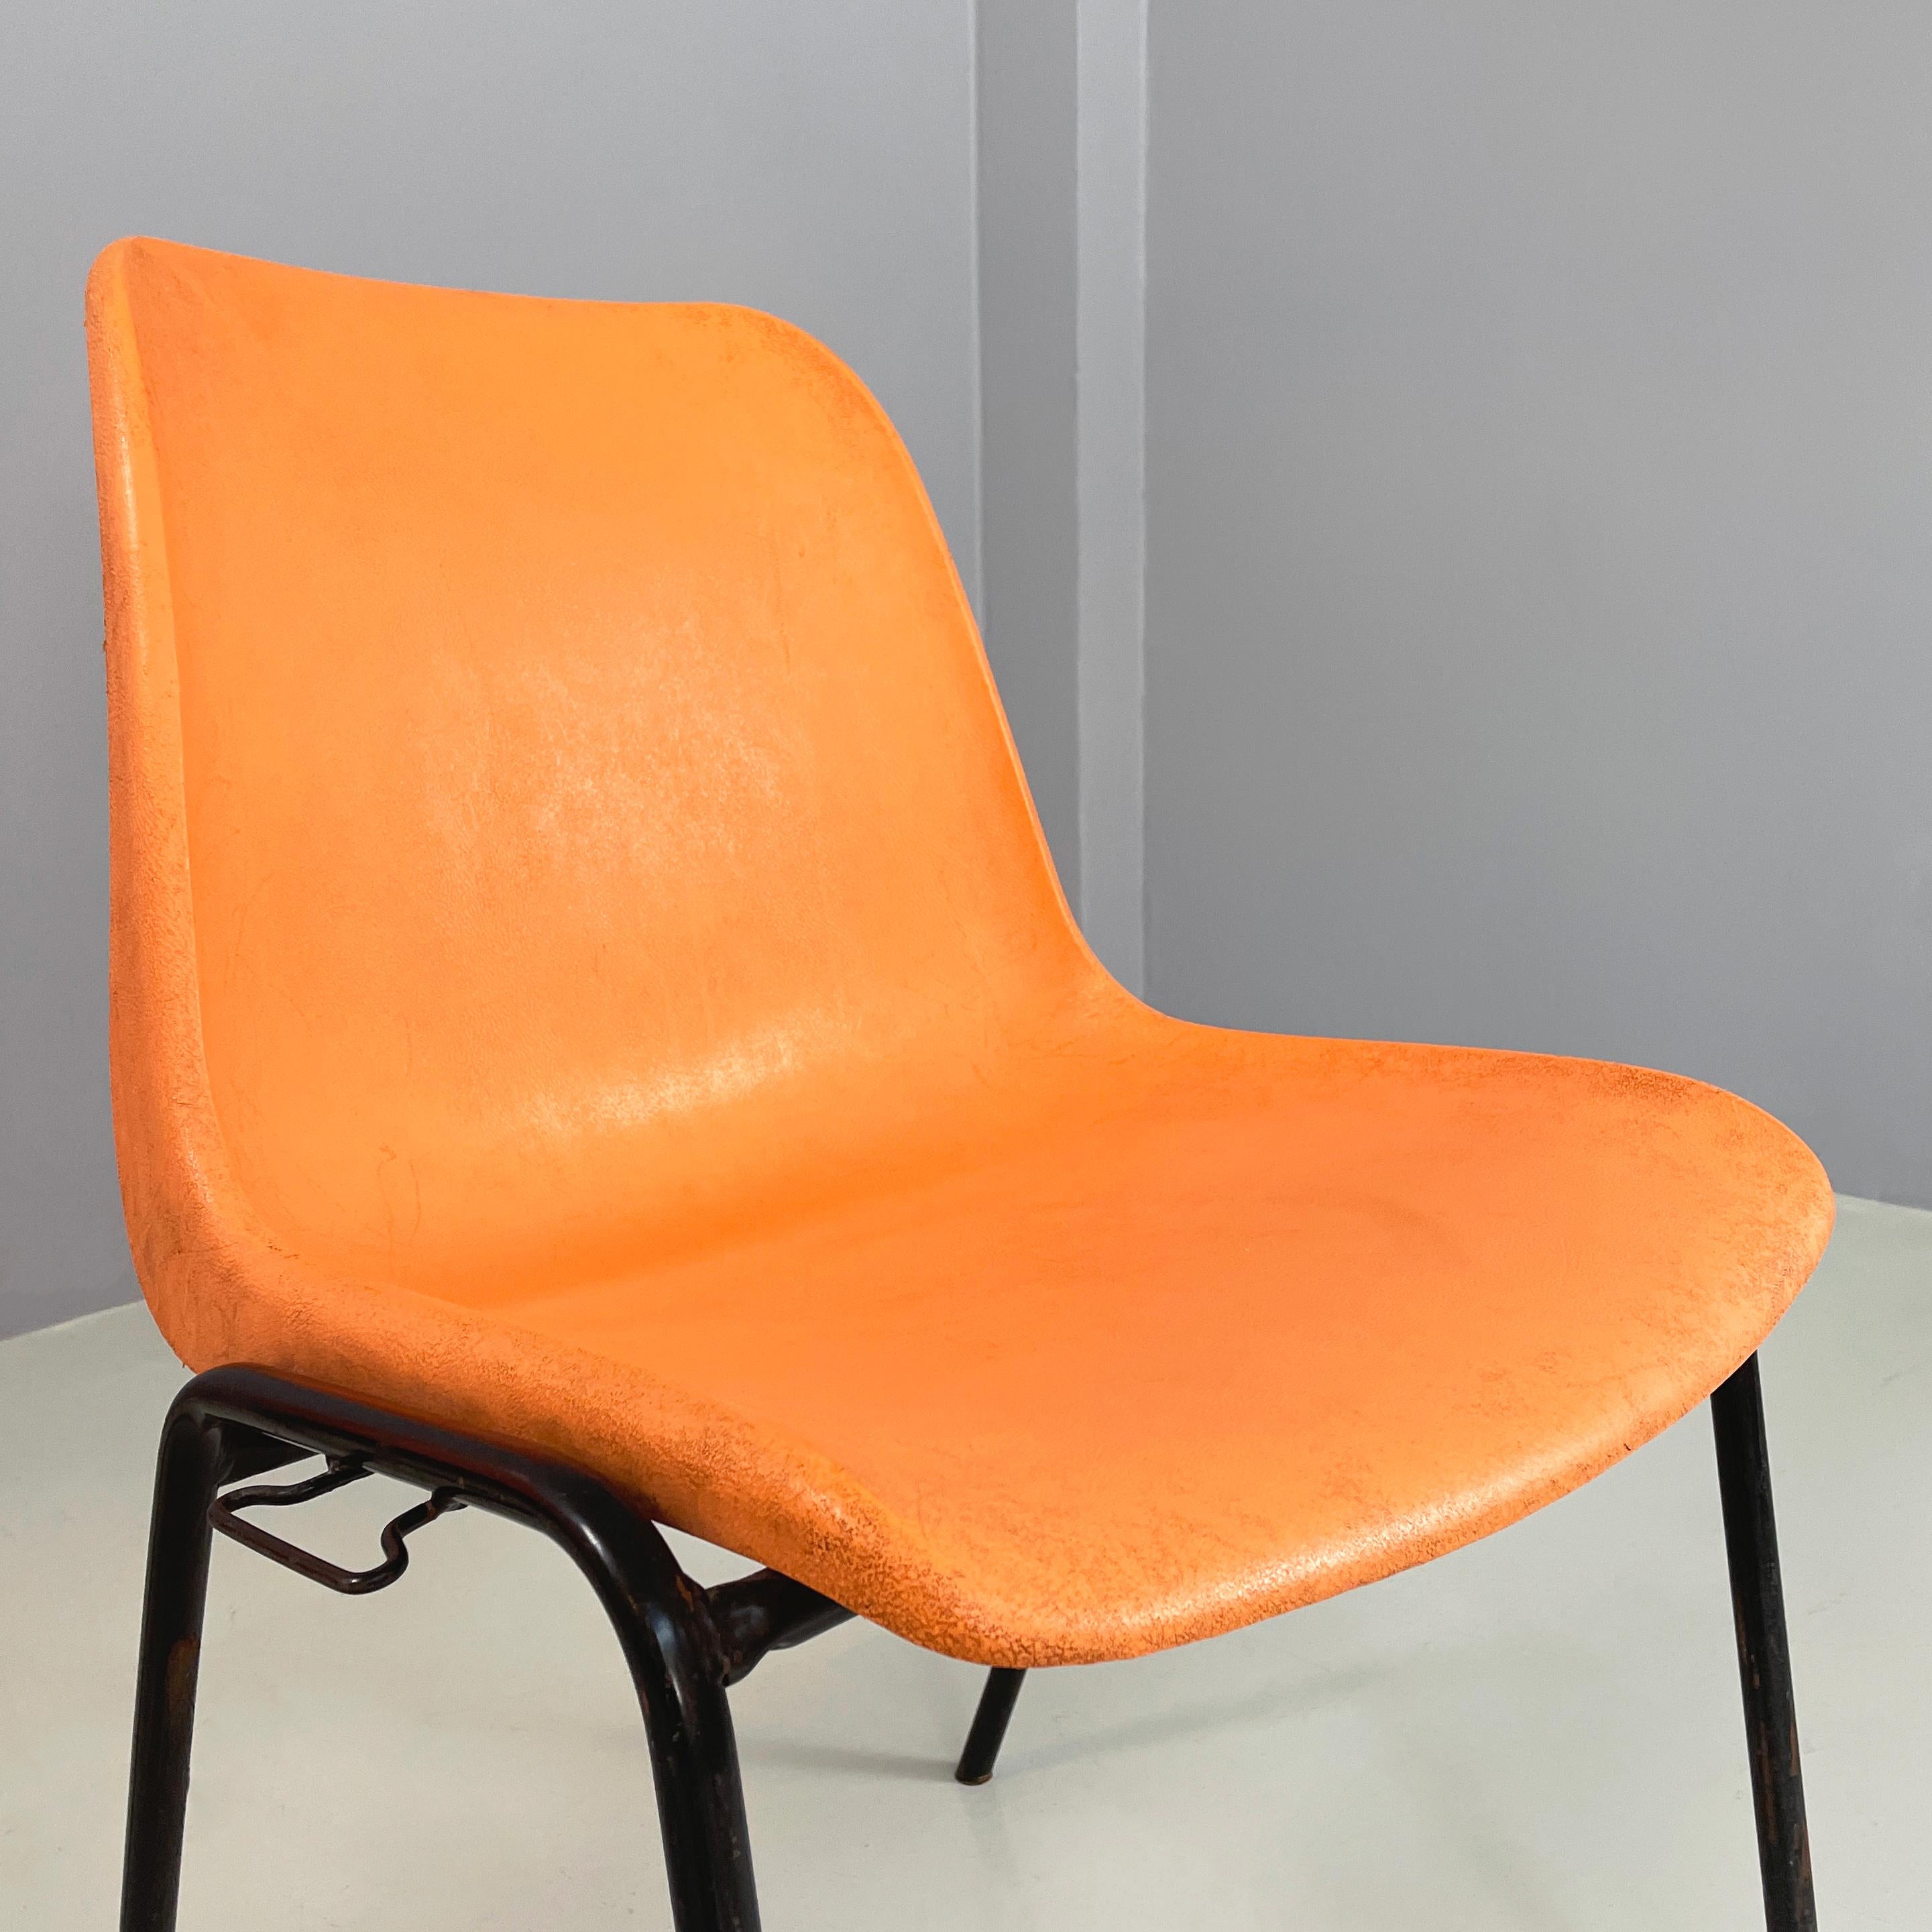 Italian modern Stackable chairs in orange plastic and black metal, 2001 For Sale 2